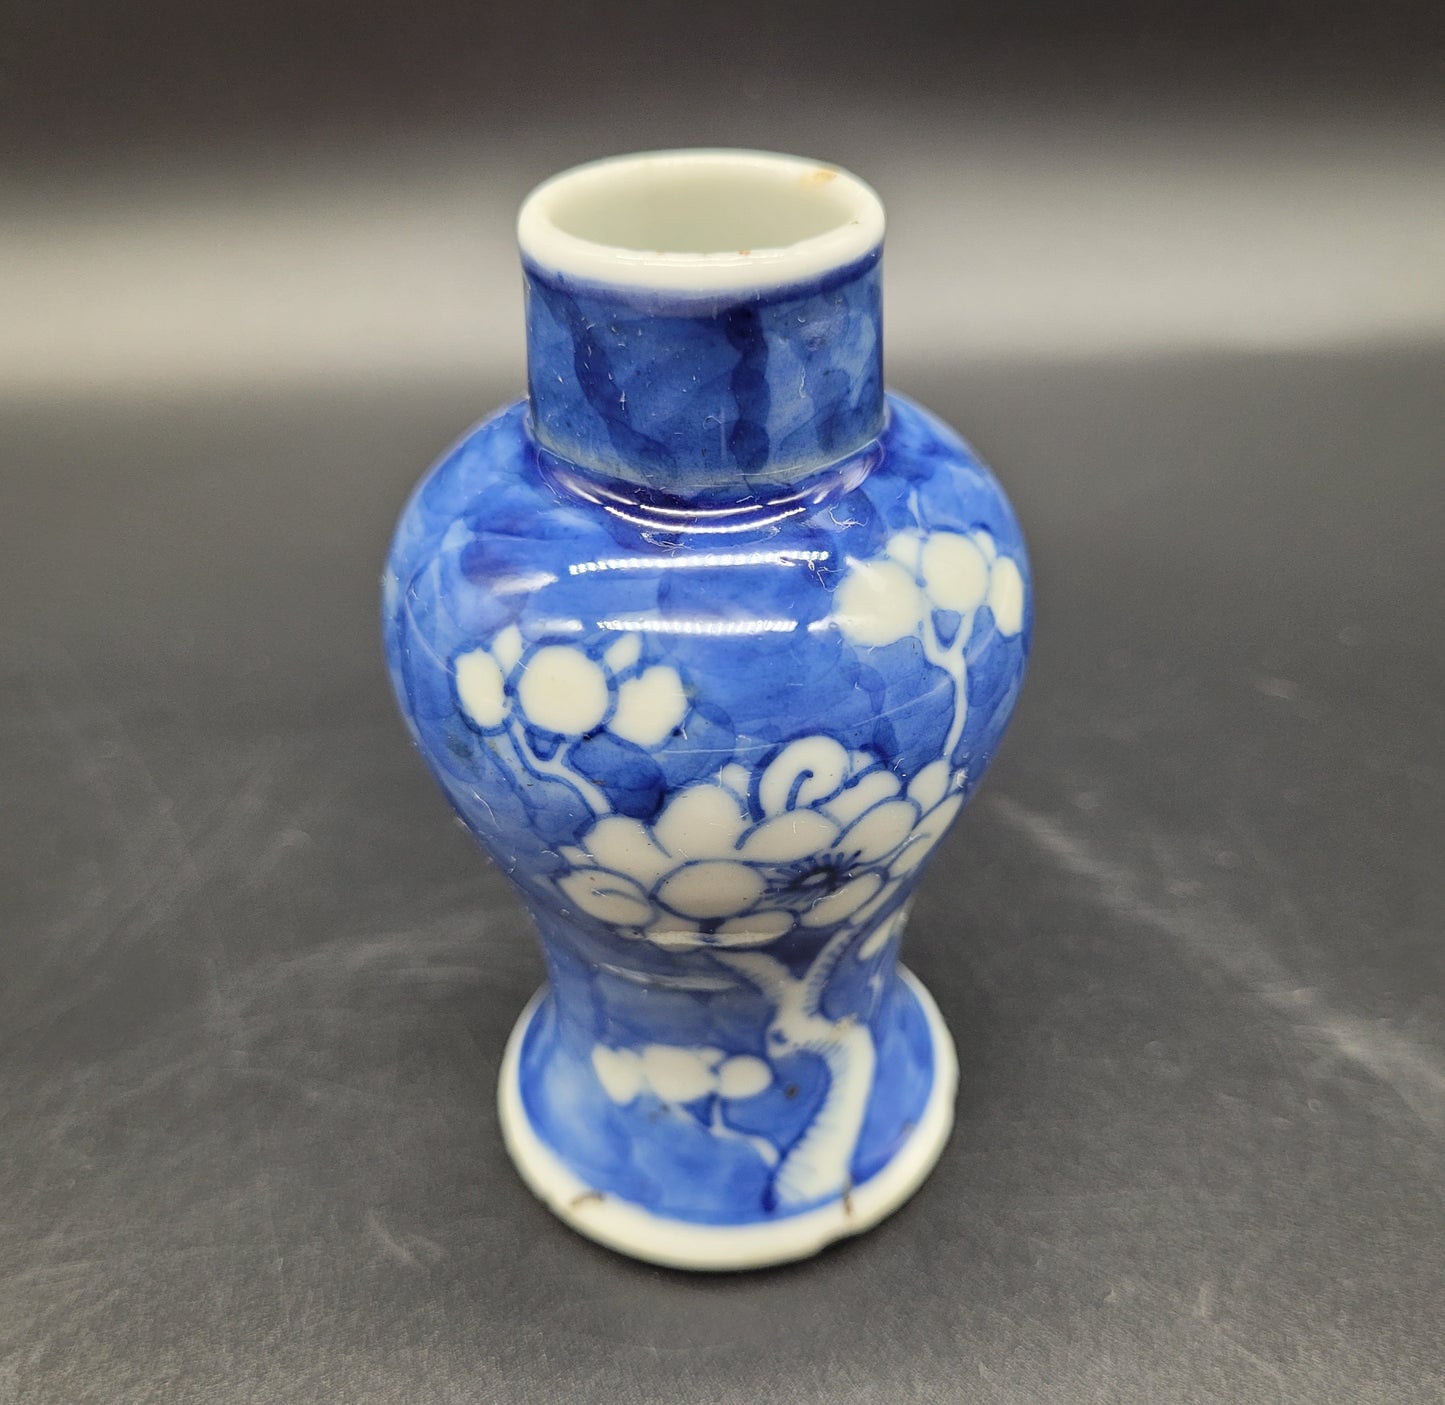 Buy Antiques Online Chinese 19th Century Prunus Pattern Miniature Vases SIGNED CHRISTIES ASIAN ART 